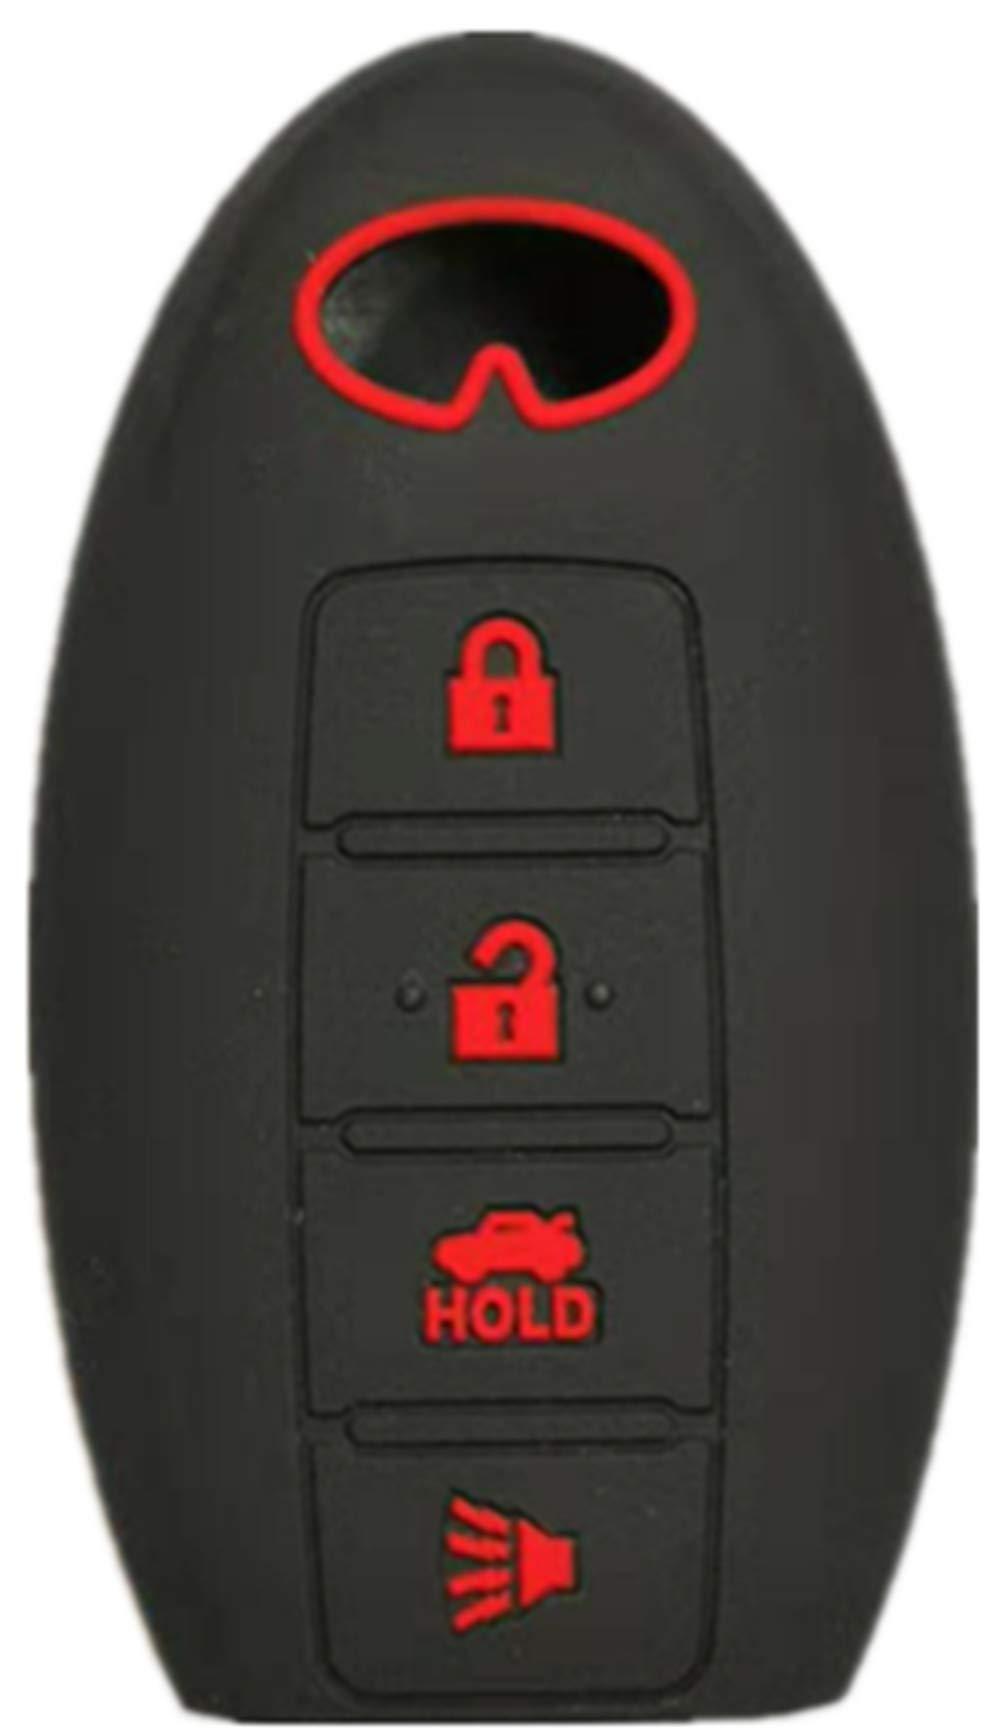  [AUSTRALIA] - RUNZUIE Silicone Keyless Entry Remote Key Fob Cover Case Protector For Infiniti EX35 FX50 G35 G37 M45 QX56 FX50 M35 M56 QX60 QX80 JX3 Black with Red 4 Buttons